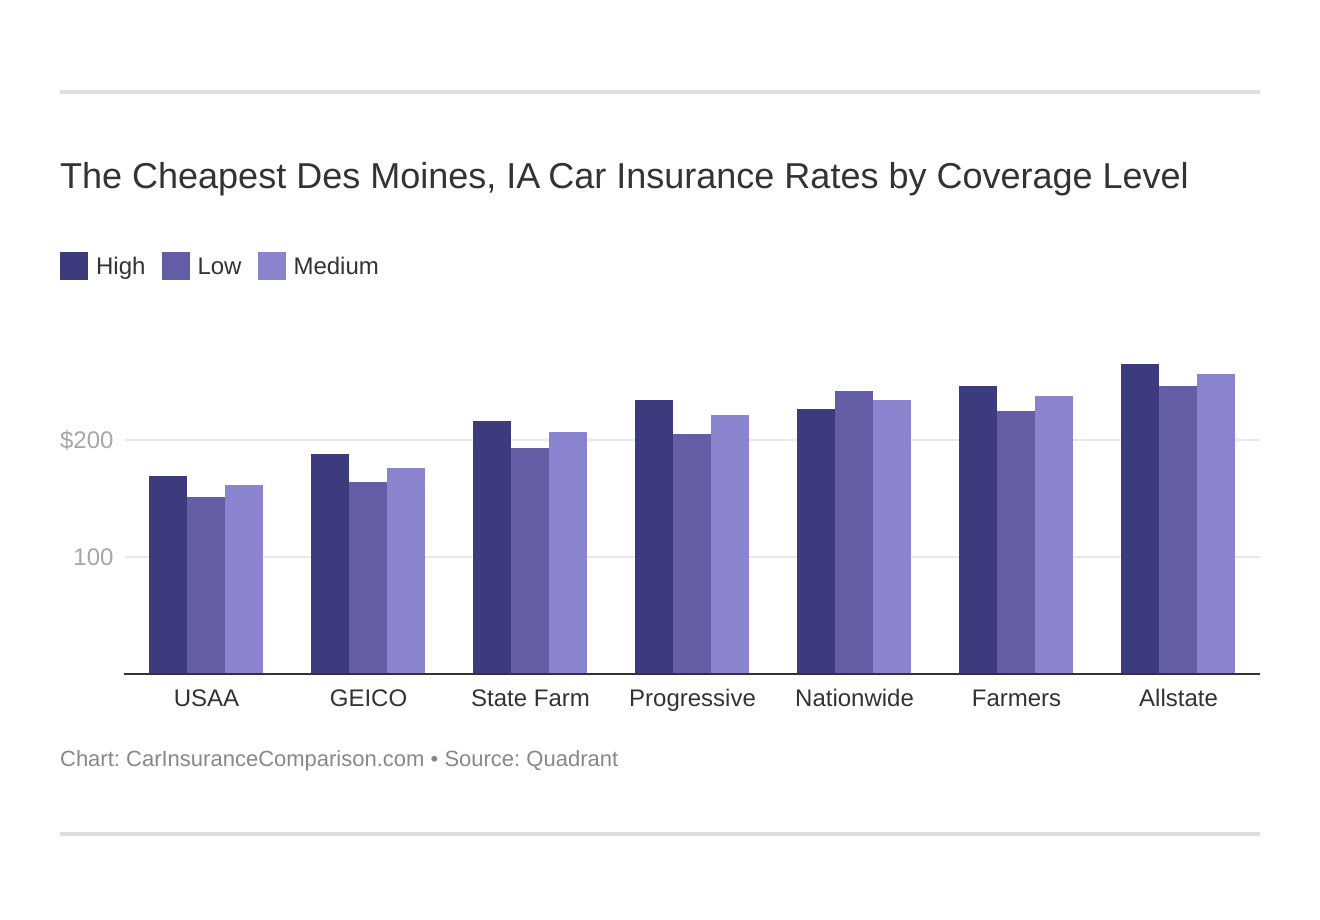 The Cheapest Des Moines, IA Car Insurance Rates by Coverage Level